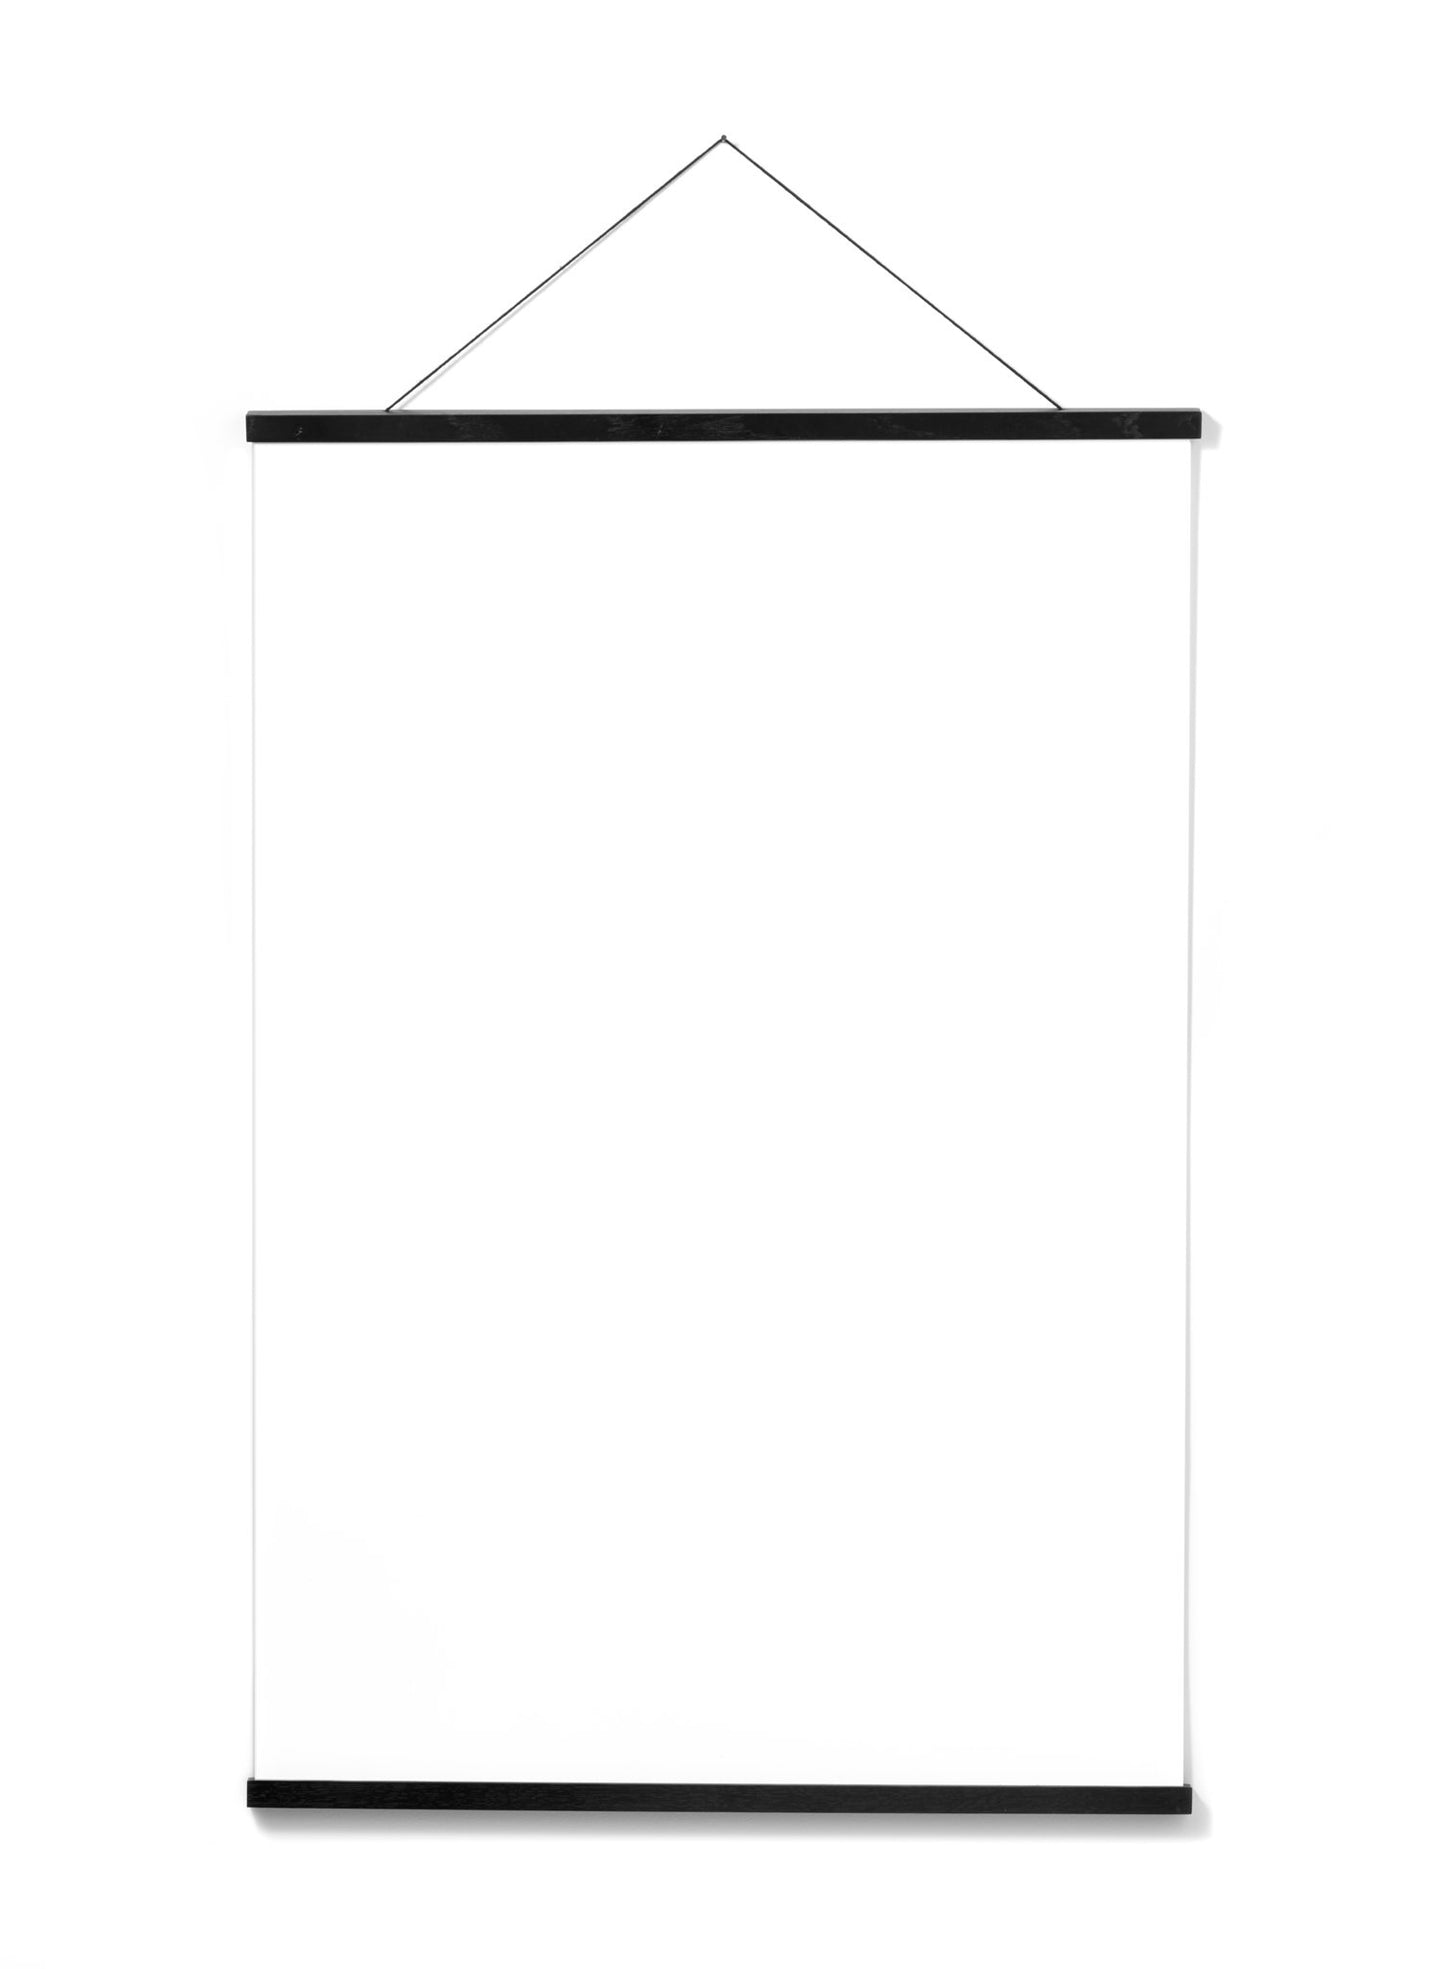 Scandinavian black oak poster wall hanger by Opposite Wall - Front of the poster hanger - Size 24 inches